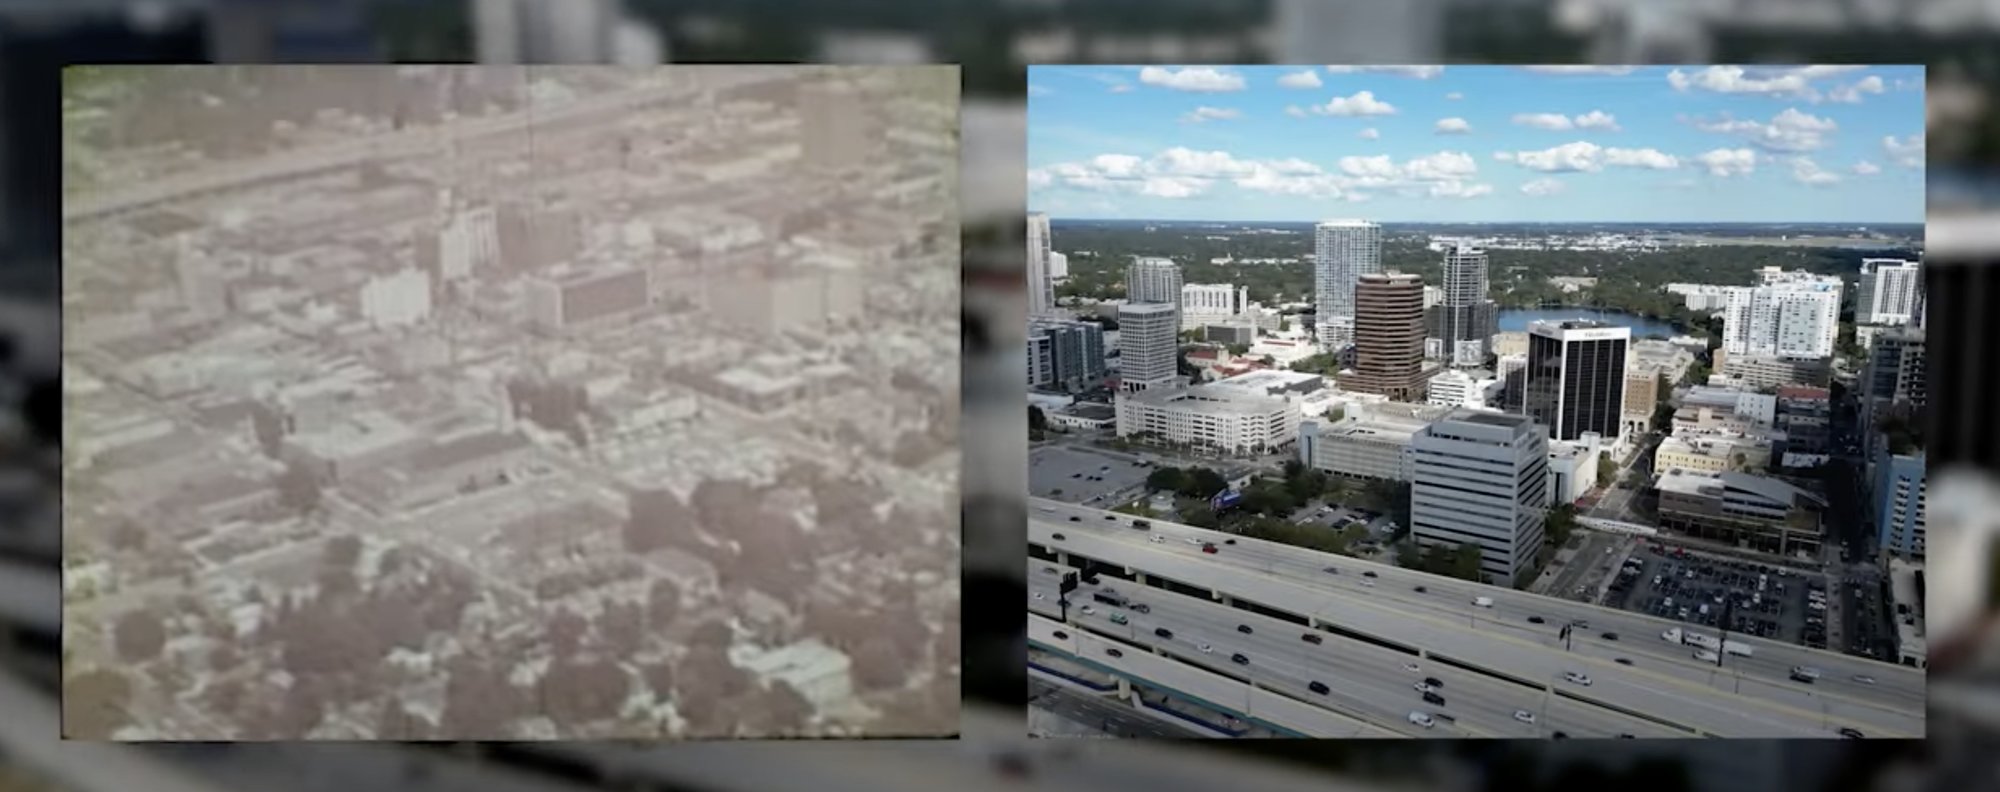 two images of downtown orlando in 1960s and now